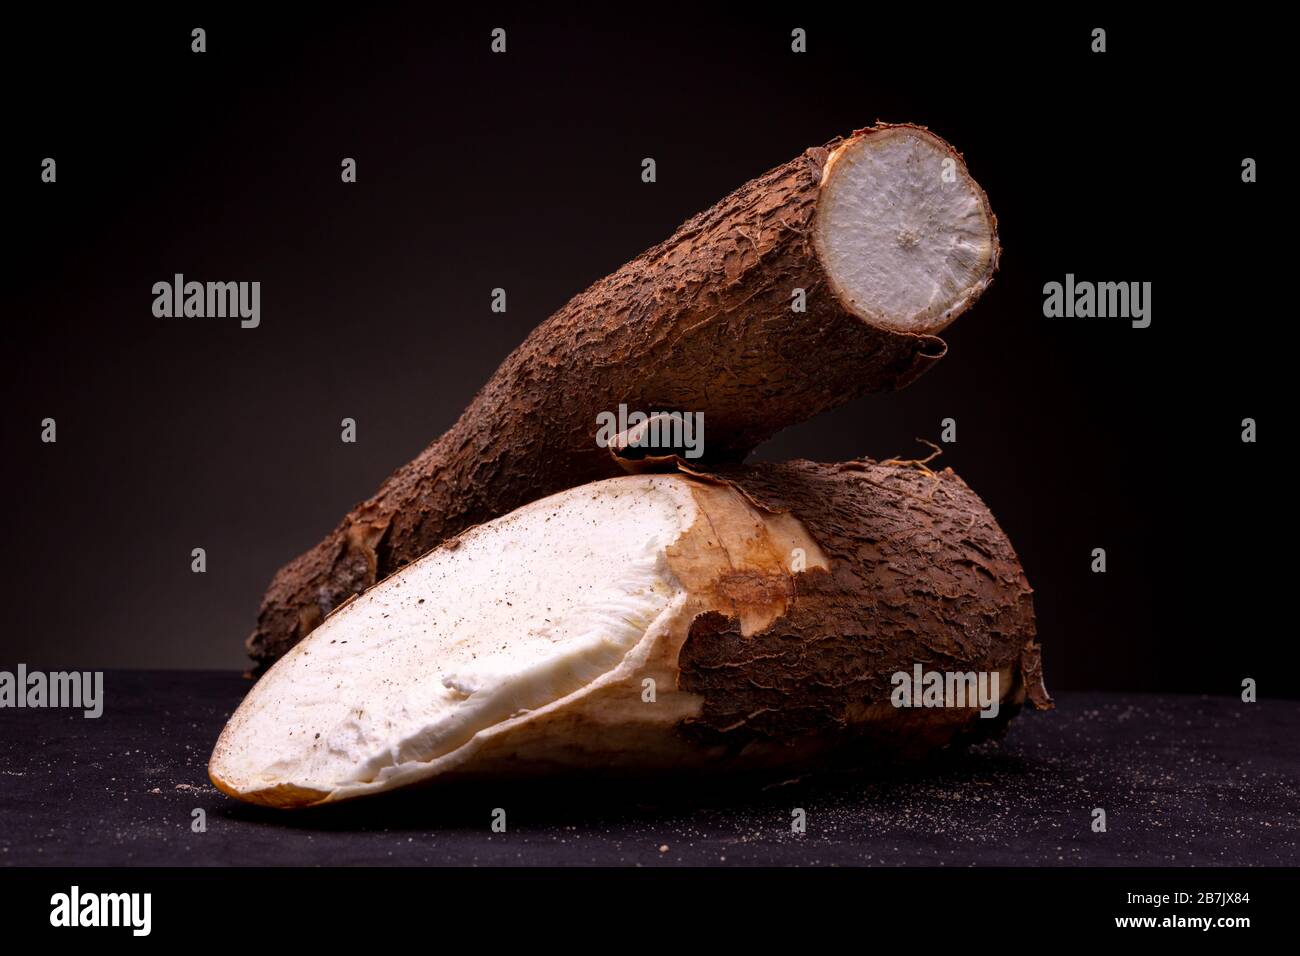 Unprepared Cassava roots with textured bark and white edible inside. Still life studio shot of shrubs contrasted against a dark grey background Stock Photo